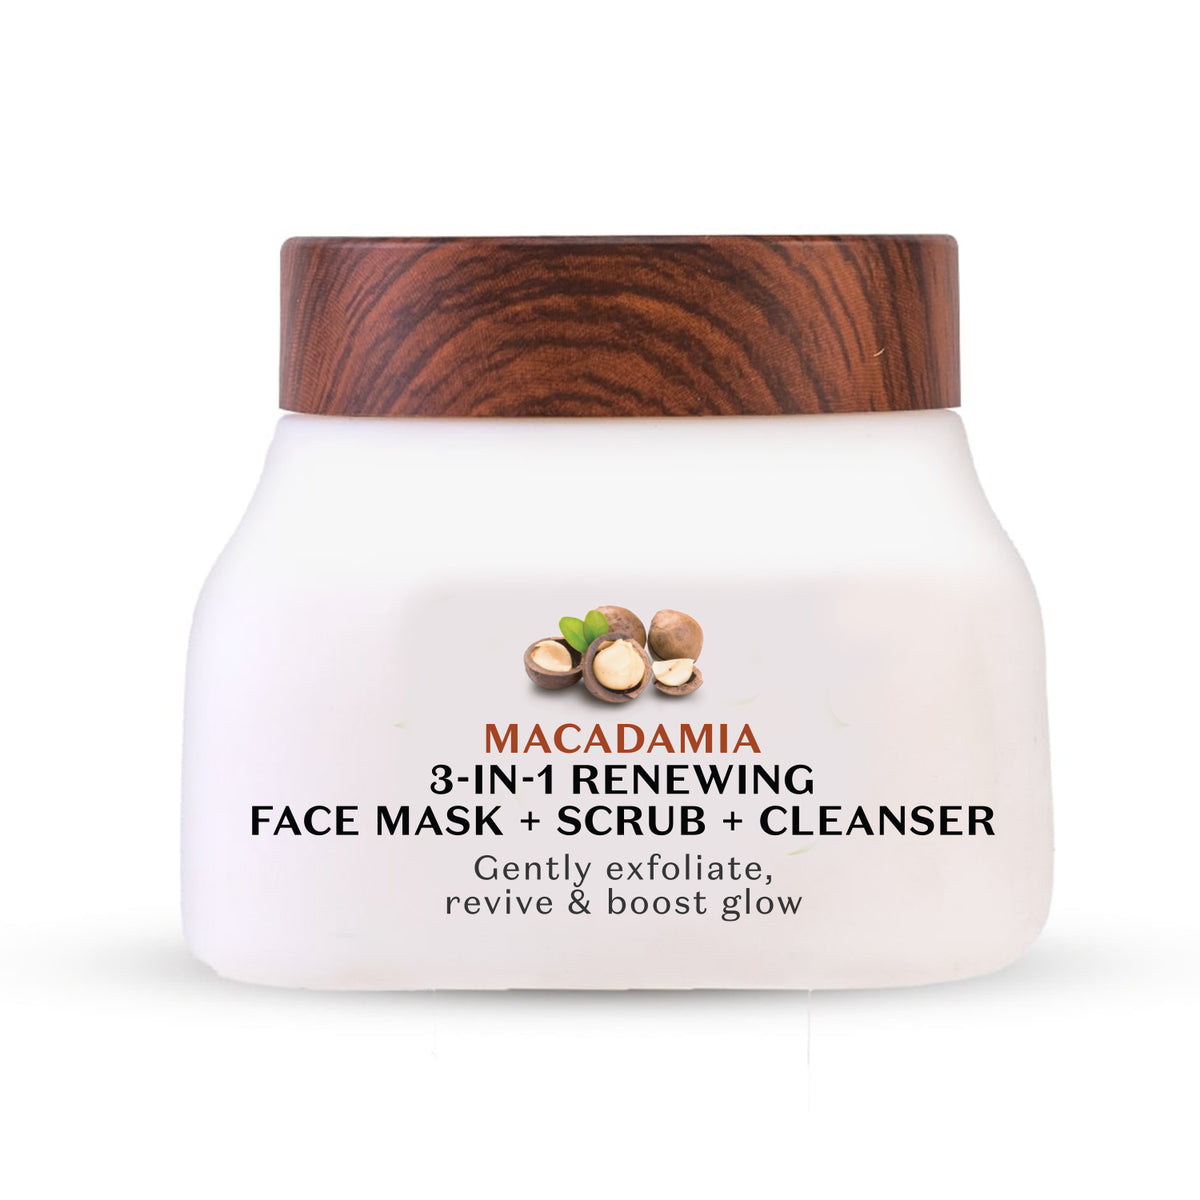 Macadamia 3 in 1 Renewing Face Mask, Scrub & Cleanser | From the makers of Parachute Advansed | 140ml